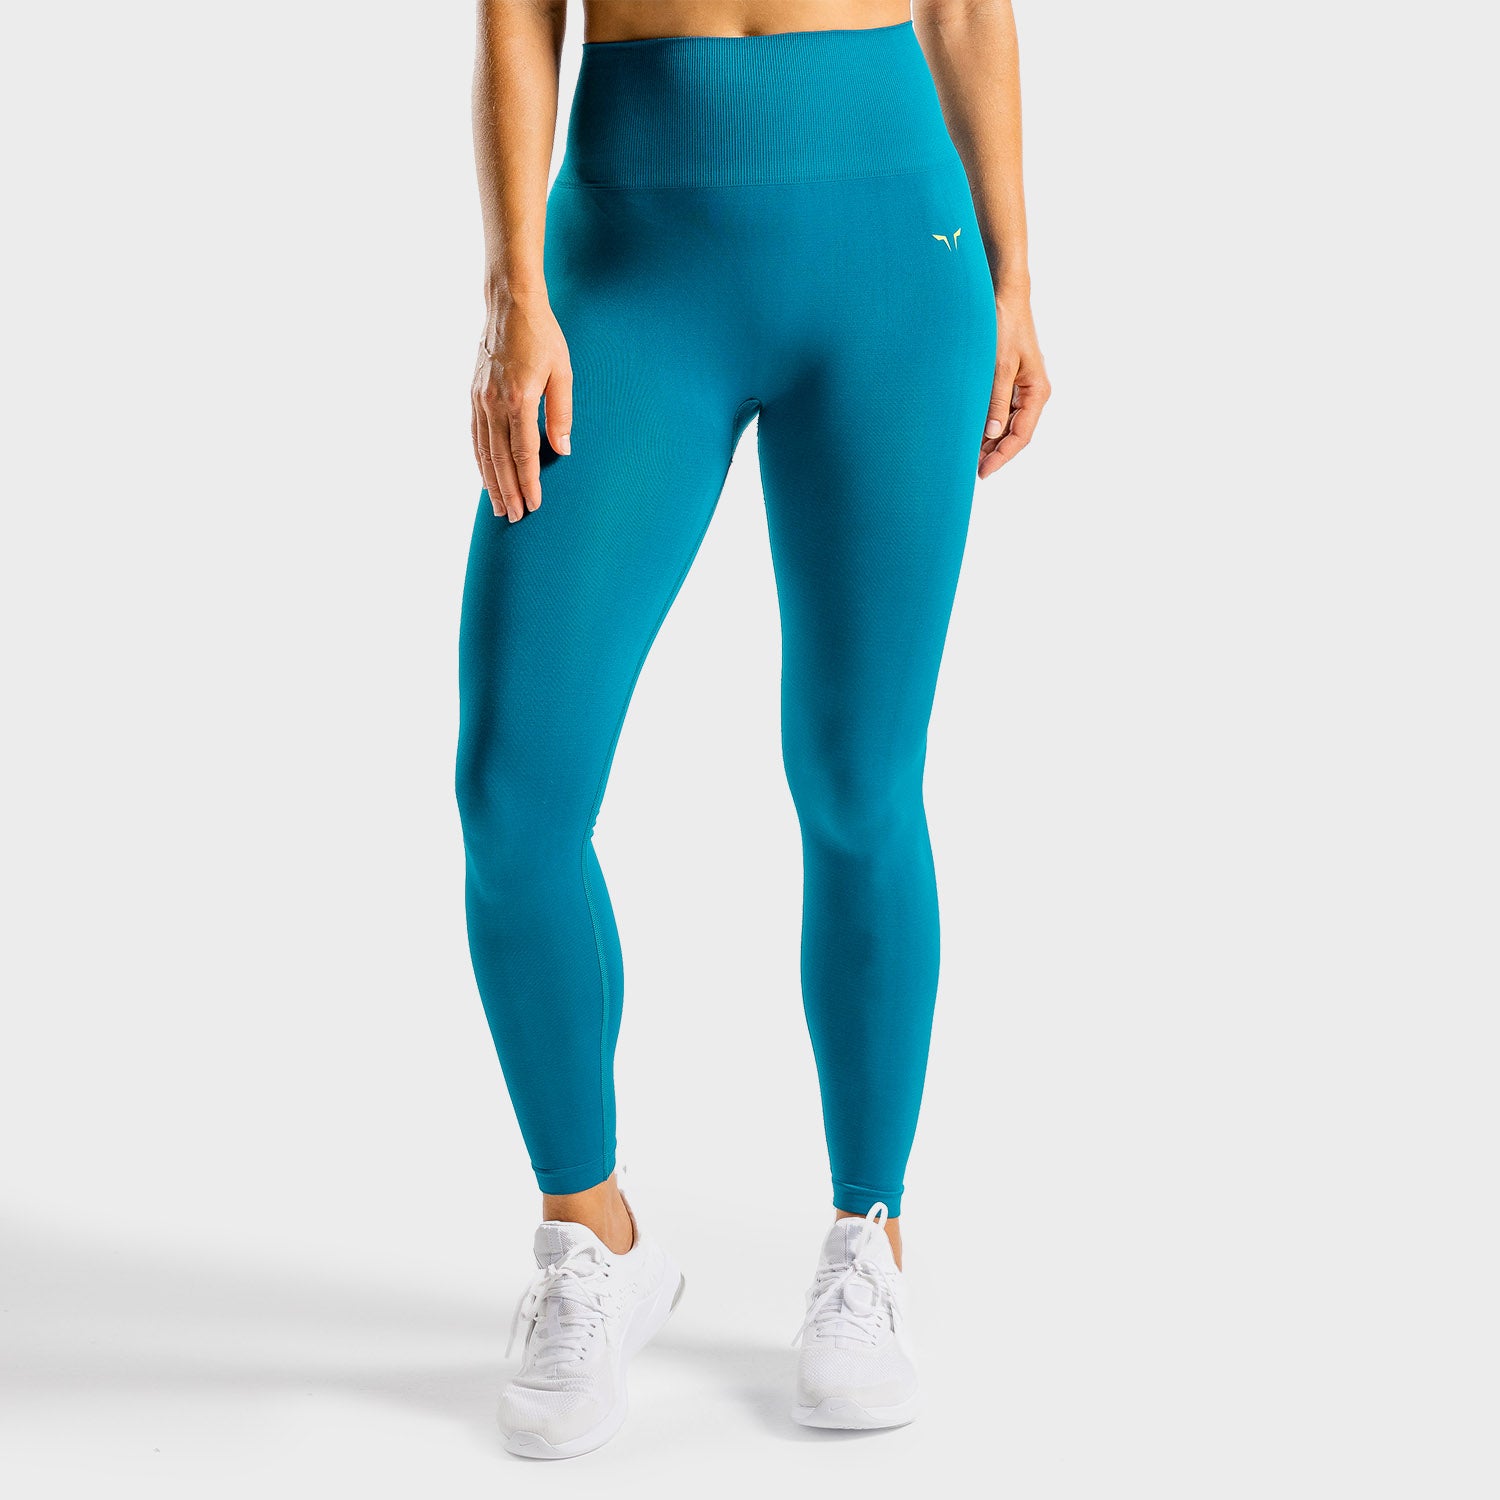 squatwolf-gym-leggings-for-women-core-seamless-leggings-blue-beat-workout-clothes